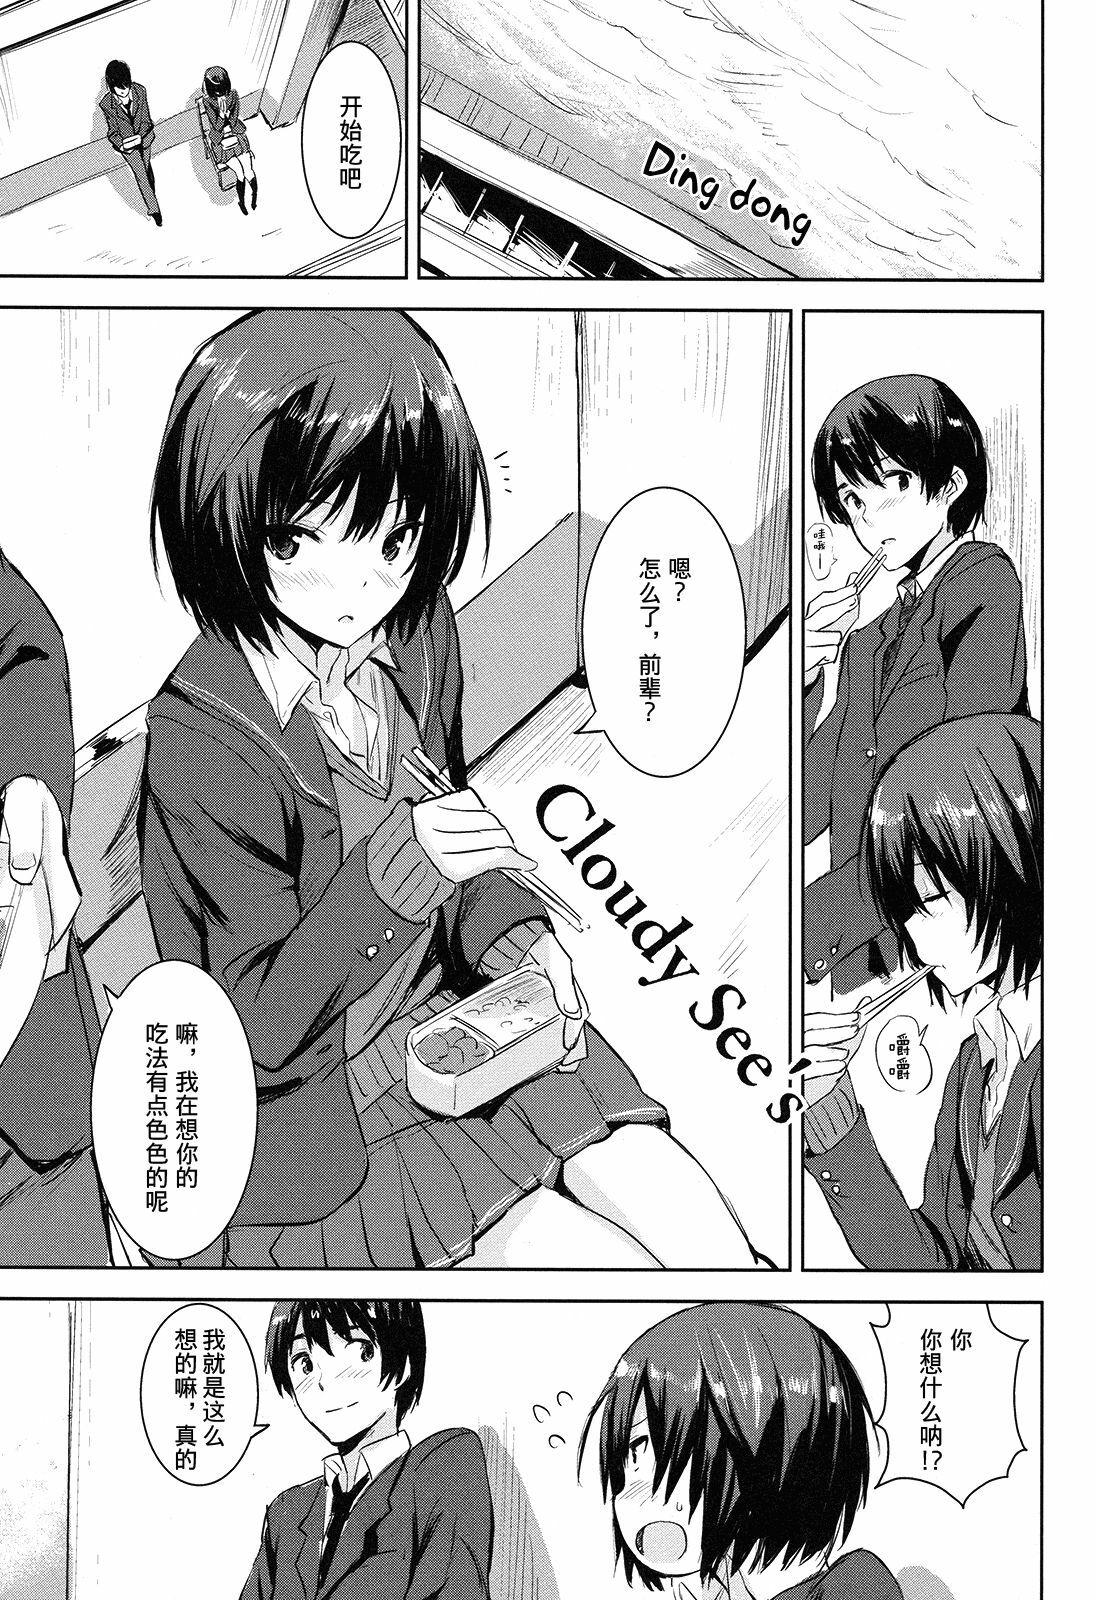 (COMIC1☆6) [Chroma of Wall (saitom)] Cloudy See's (Amagami) [Chinese] [渣渣汉化组] page 3 full